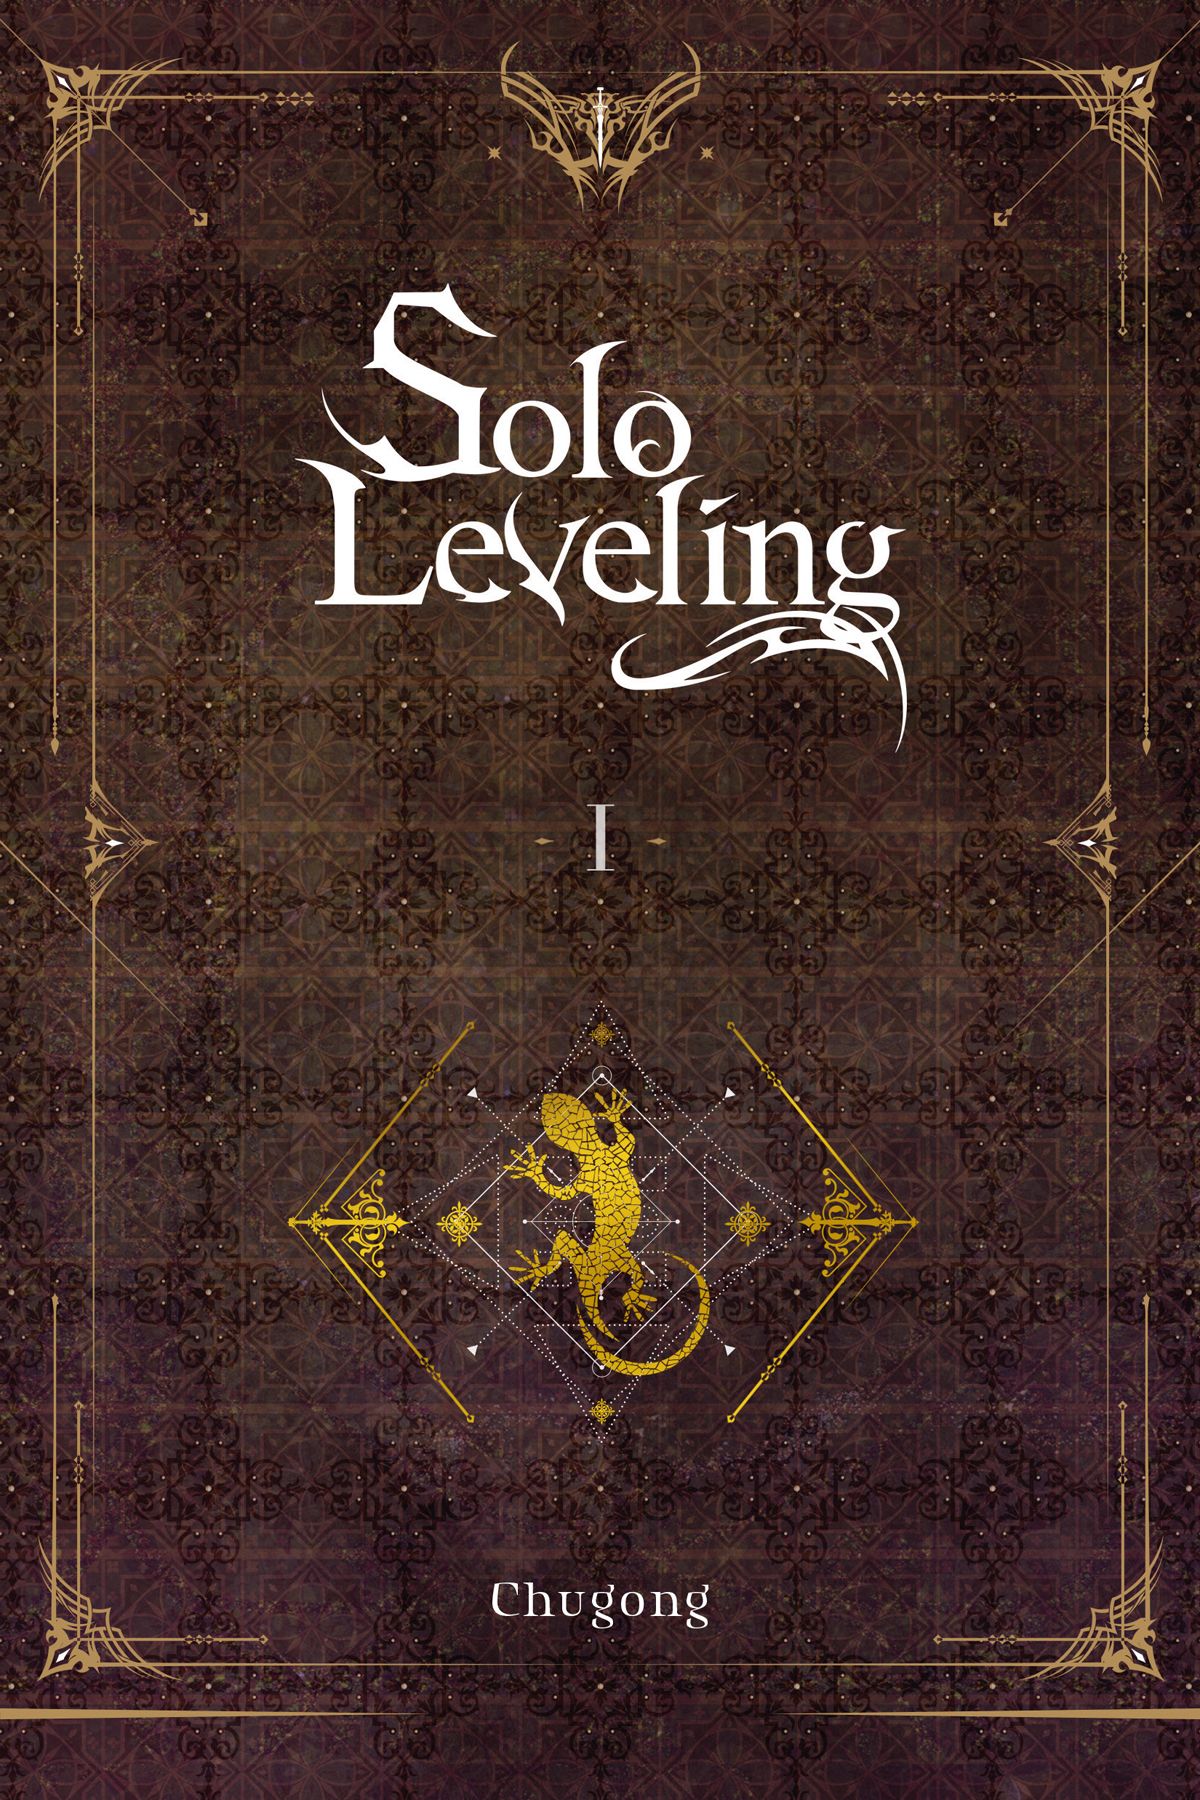 book review of solo leveling